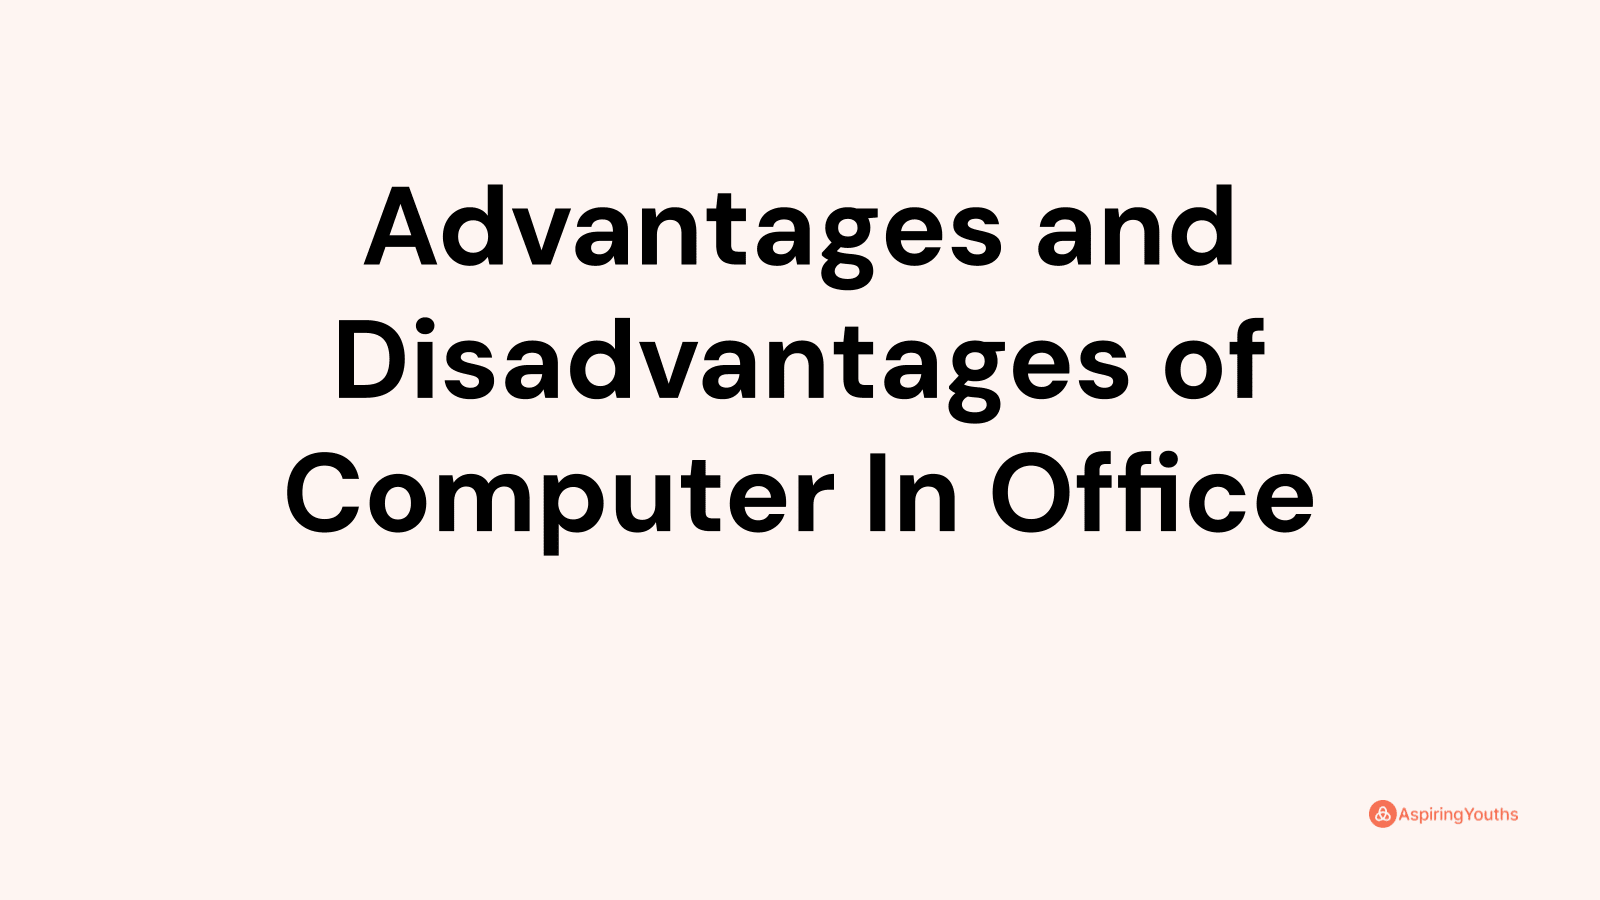 Advantages and disadvantages of Computer In Office